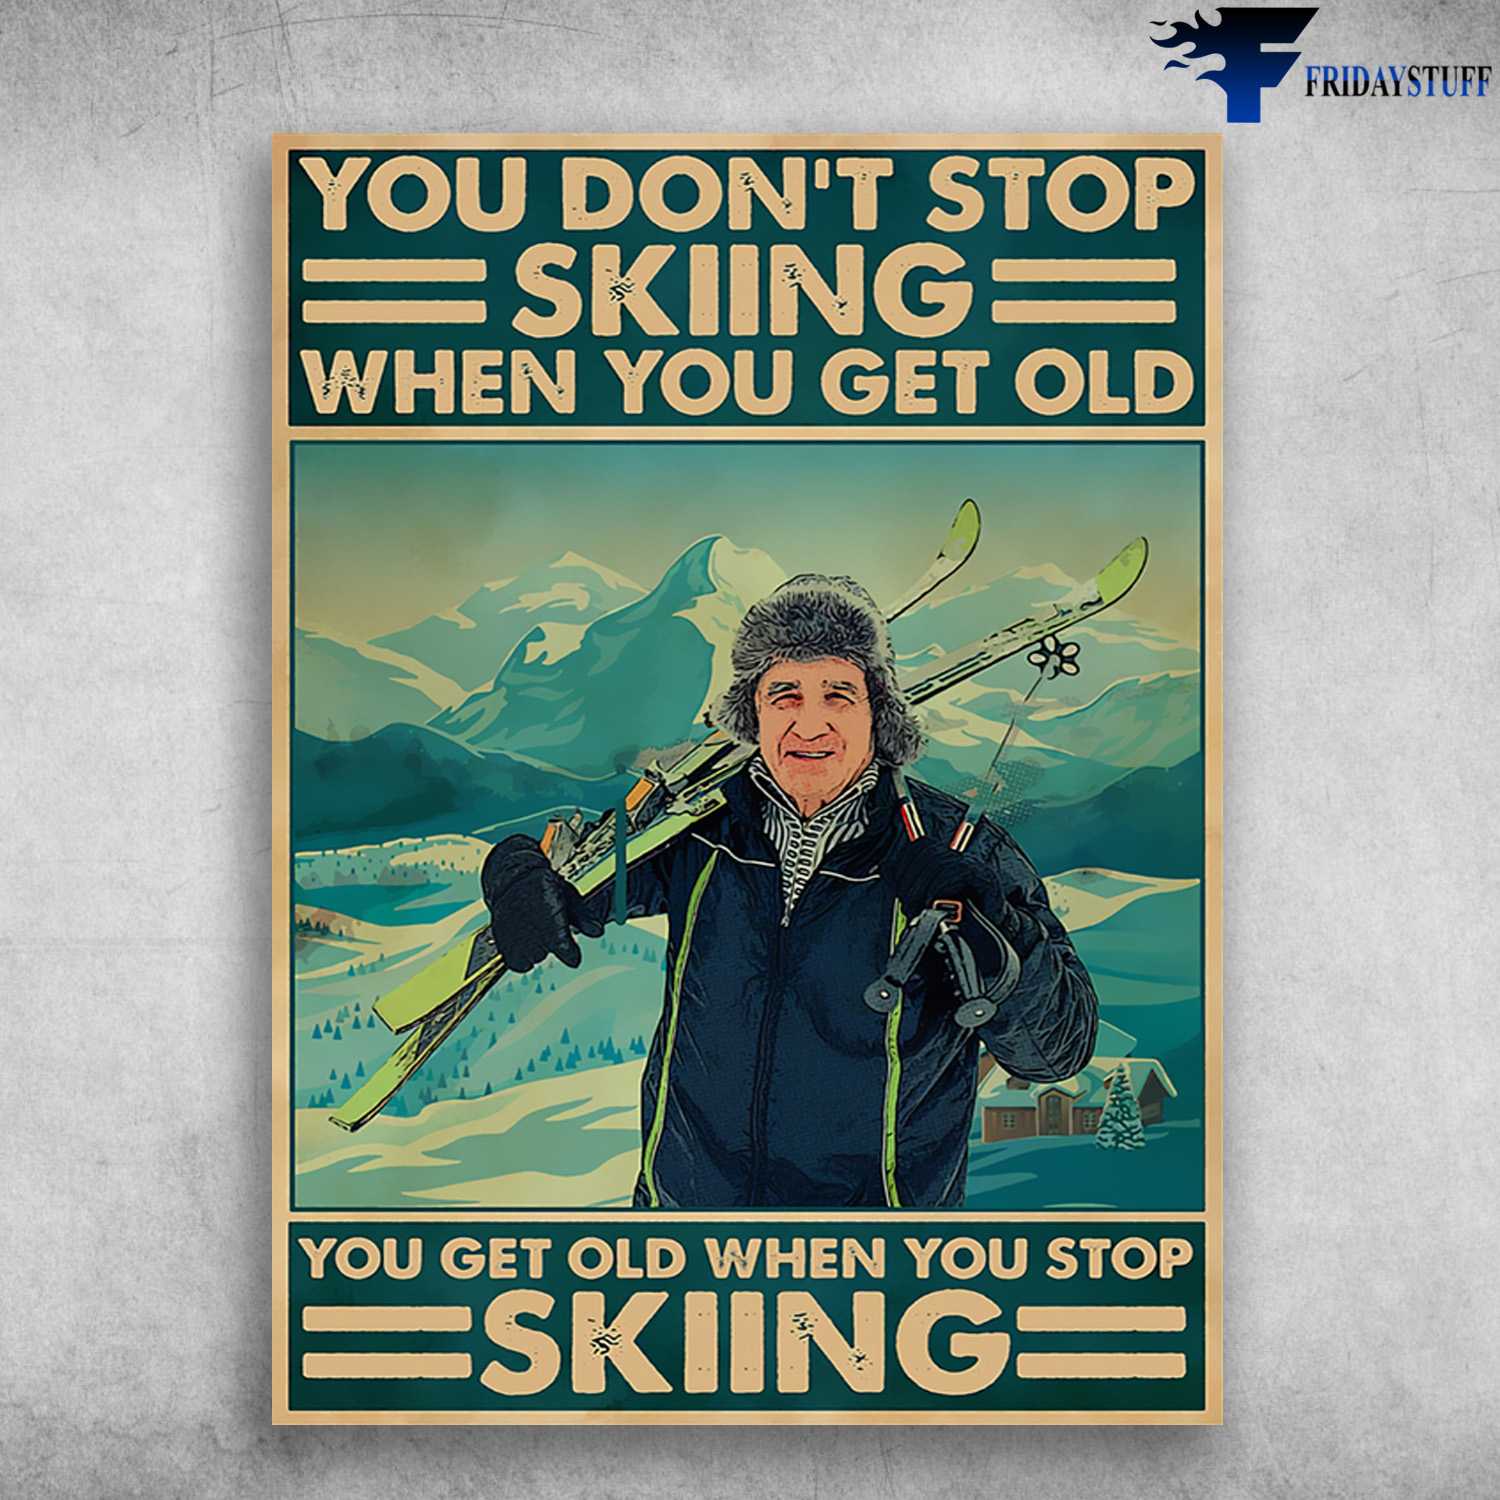 Skiing Old Man, Skiing Lover, You Don't Stop Skiing When You Get Old, You Get Old When You Stop Skiing